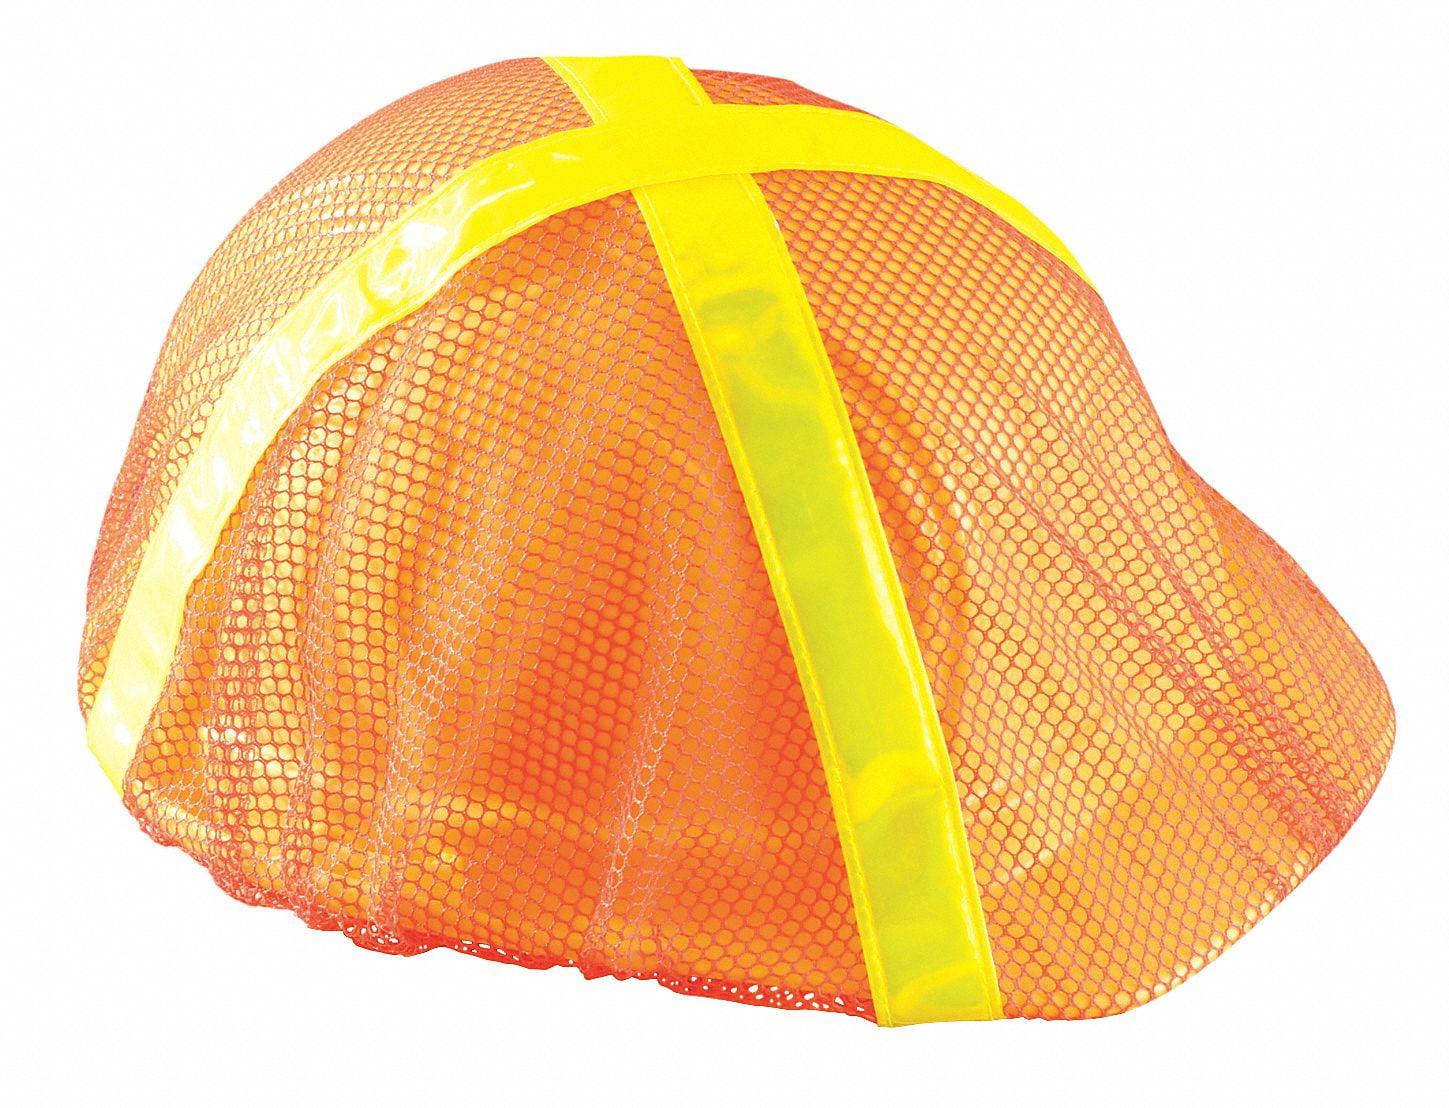 Cowboy Hard Hat Protects From Sun, Rain, and Falling Tools - PK